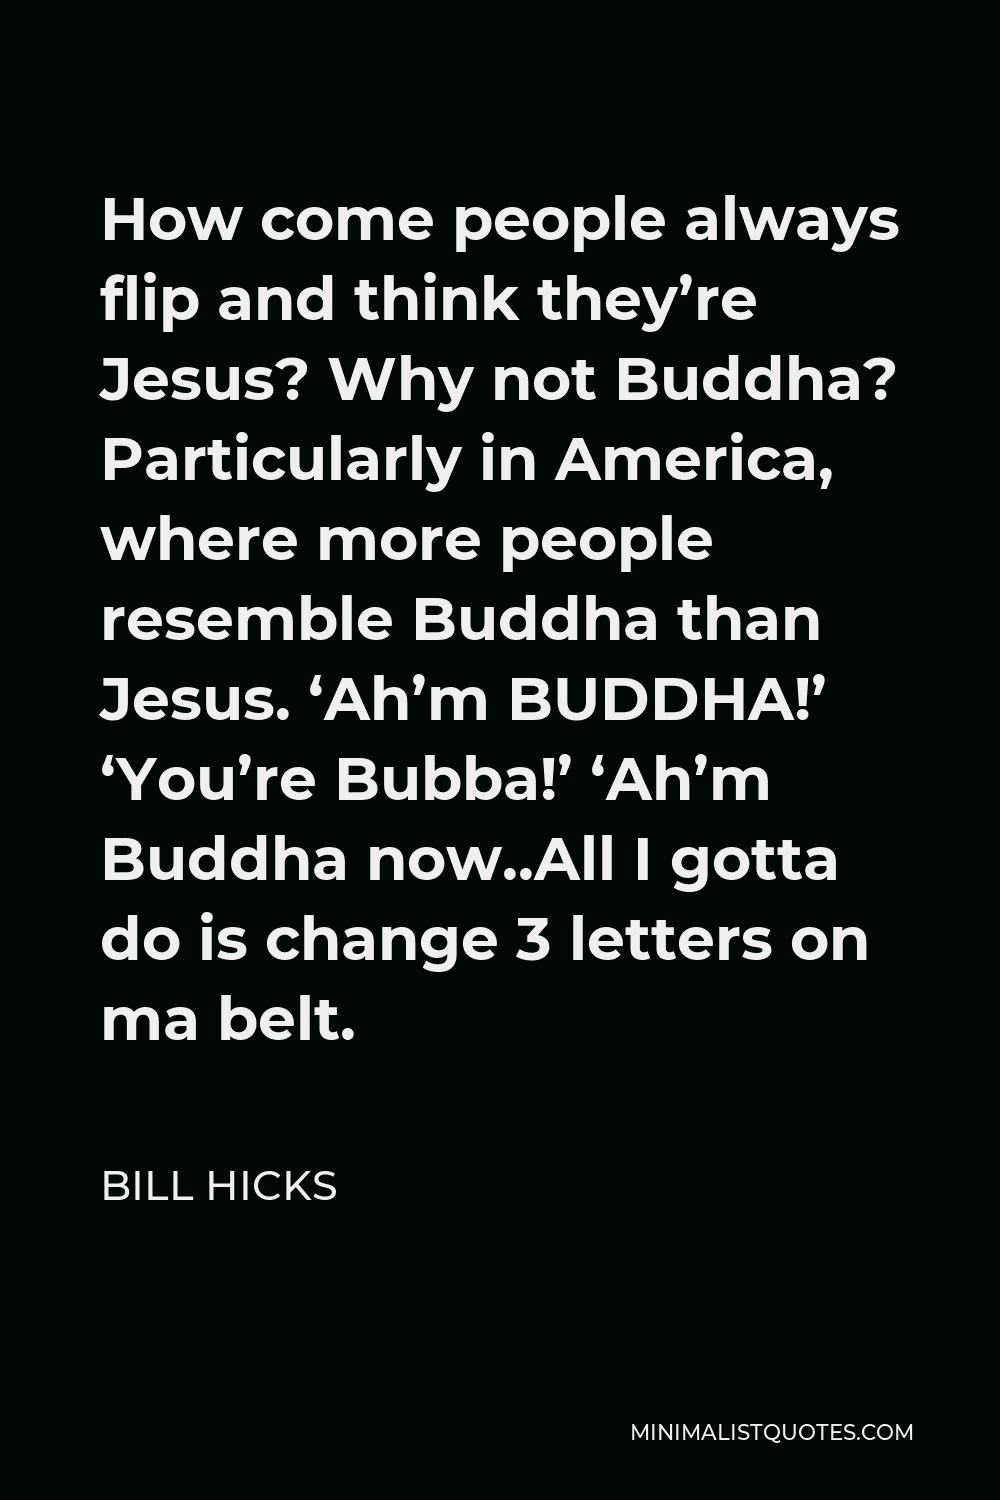 Bill Hicks Quote - How come people always flip and think they’re Jesus? Why not Buddha? Particularly in America, where more people resemble Buddha than Jesus. ‘Ah’m BUDDHA!’ ‘You’re Bubba!’ ‘Ah’m Buddha now..All I gotta do is change 3 letters on ma belt.